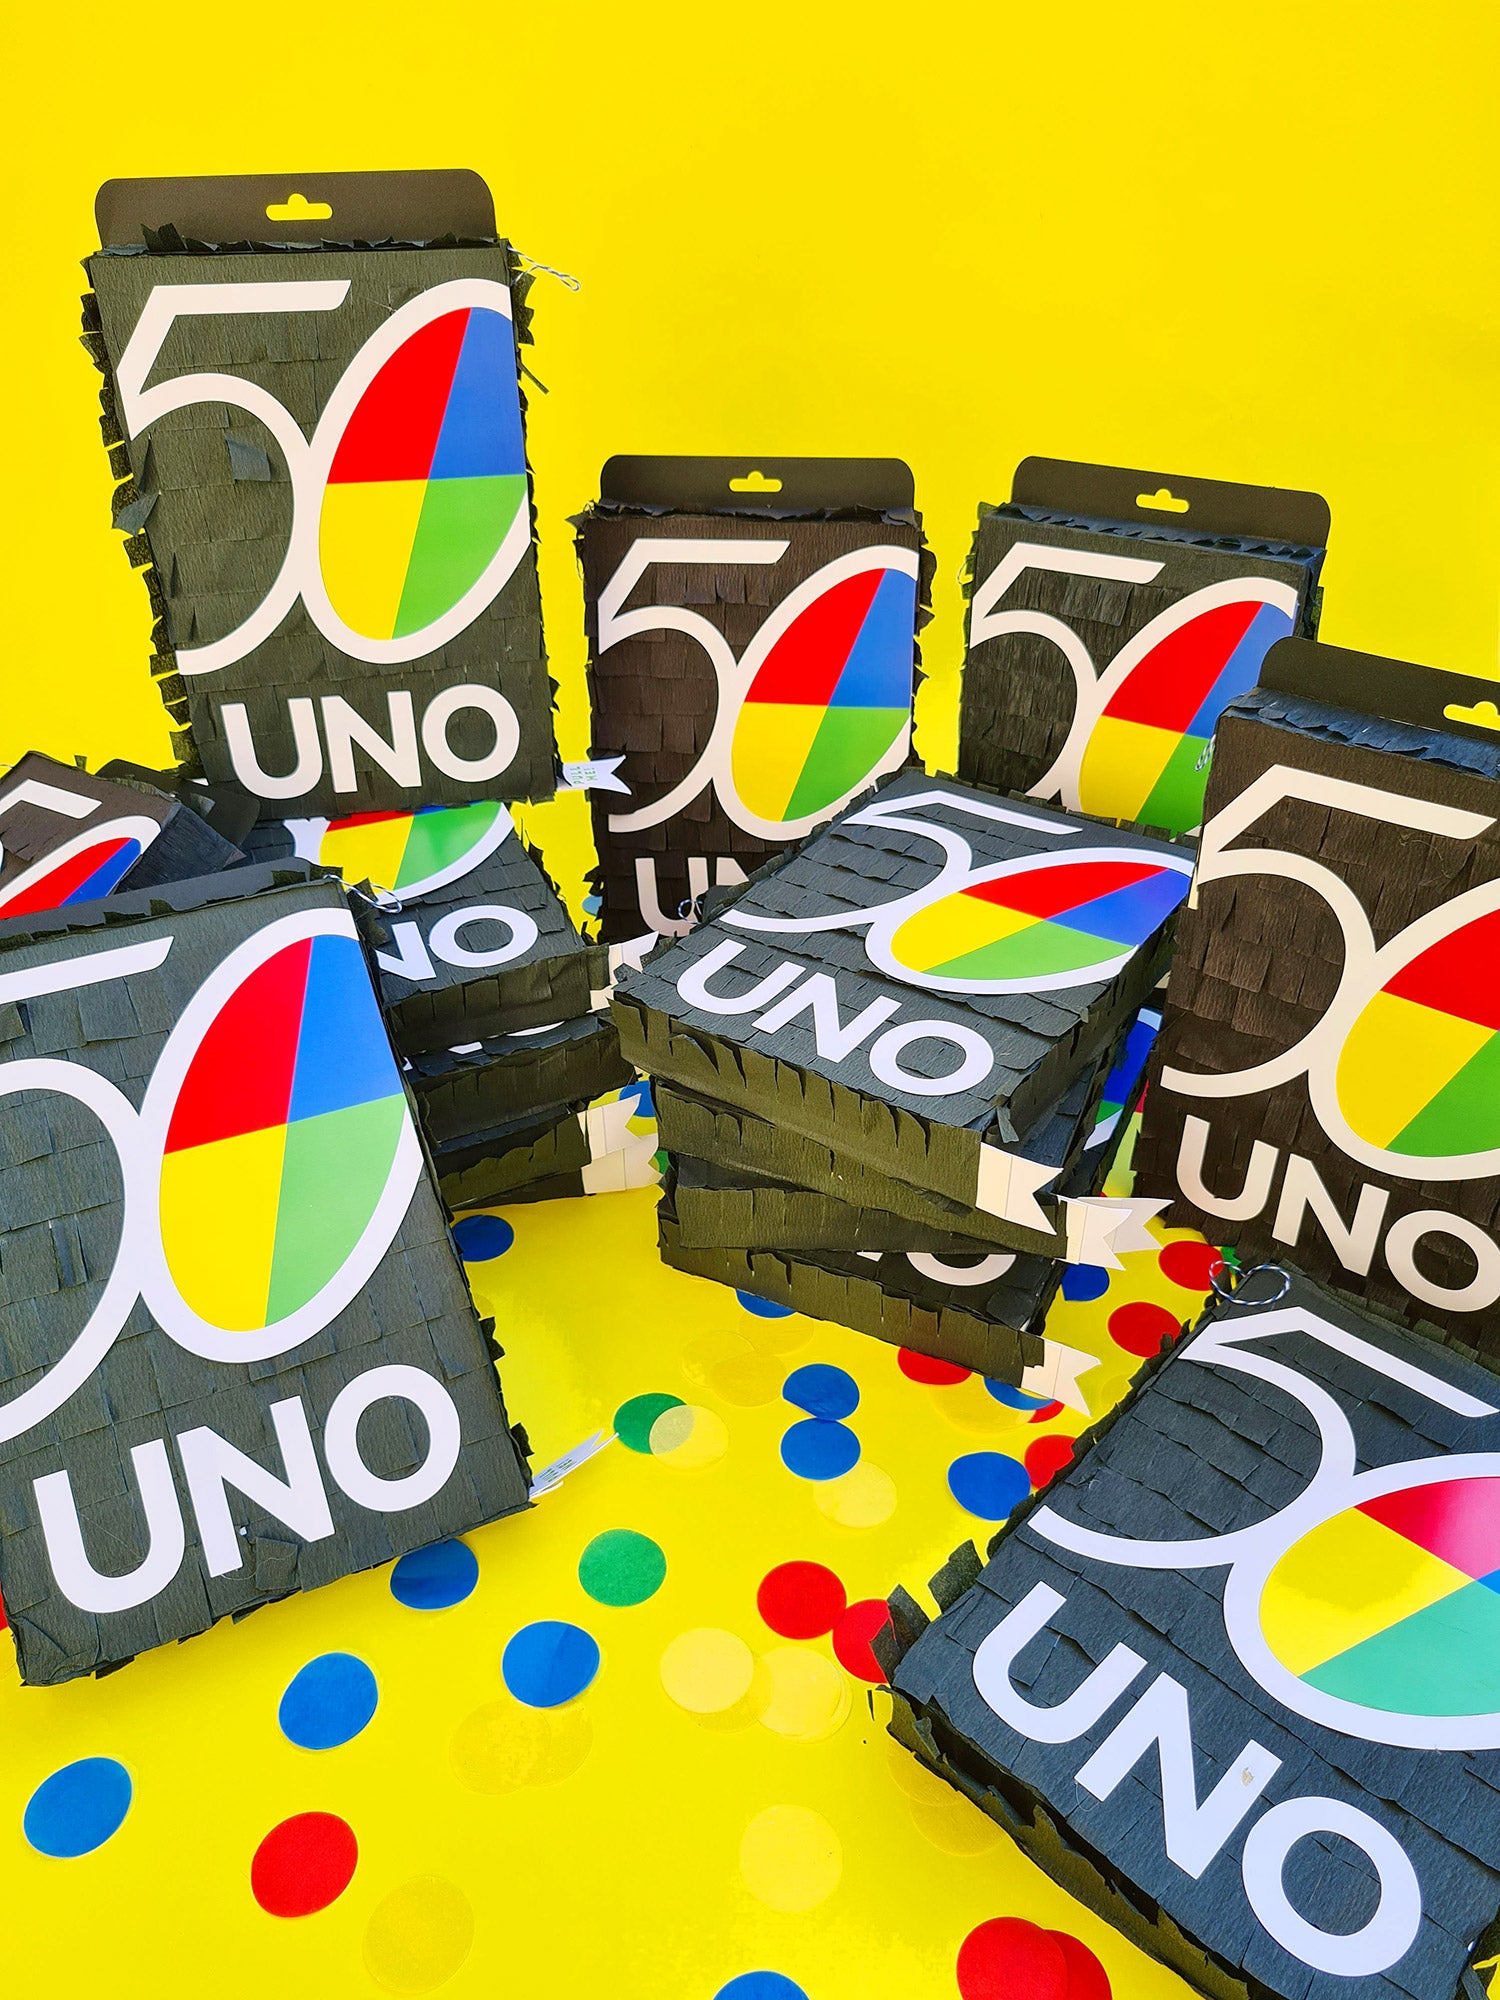 A collection of piñatas in the shape of black UNO playing card boxes, with the UNO logo on the front sit on a yellow background, surrounded by confetti in blue, yellow, red and green. 